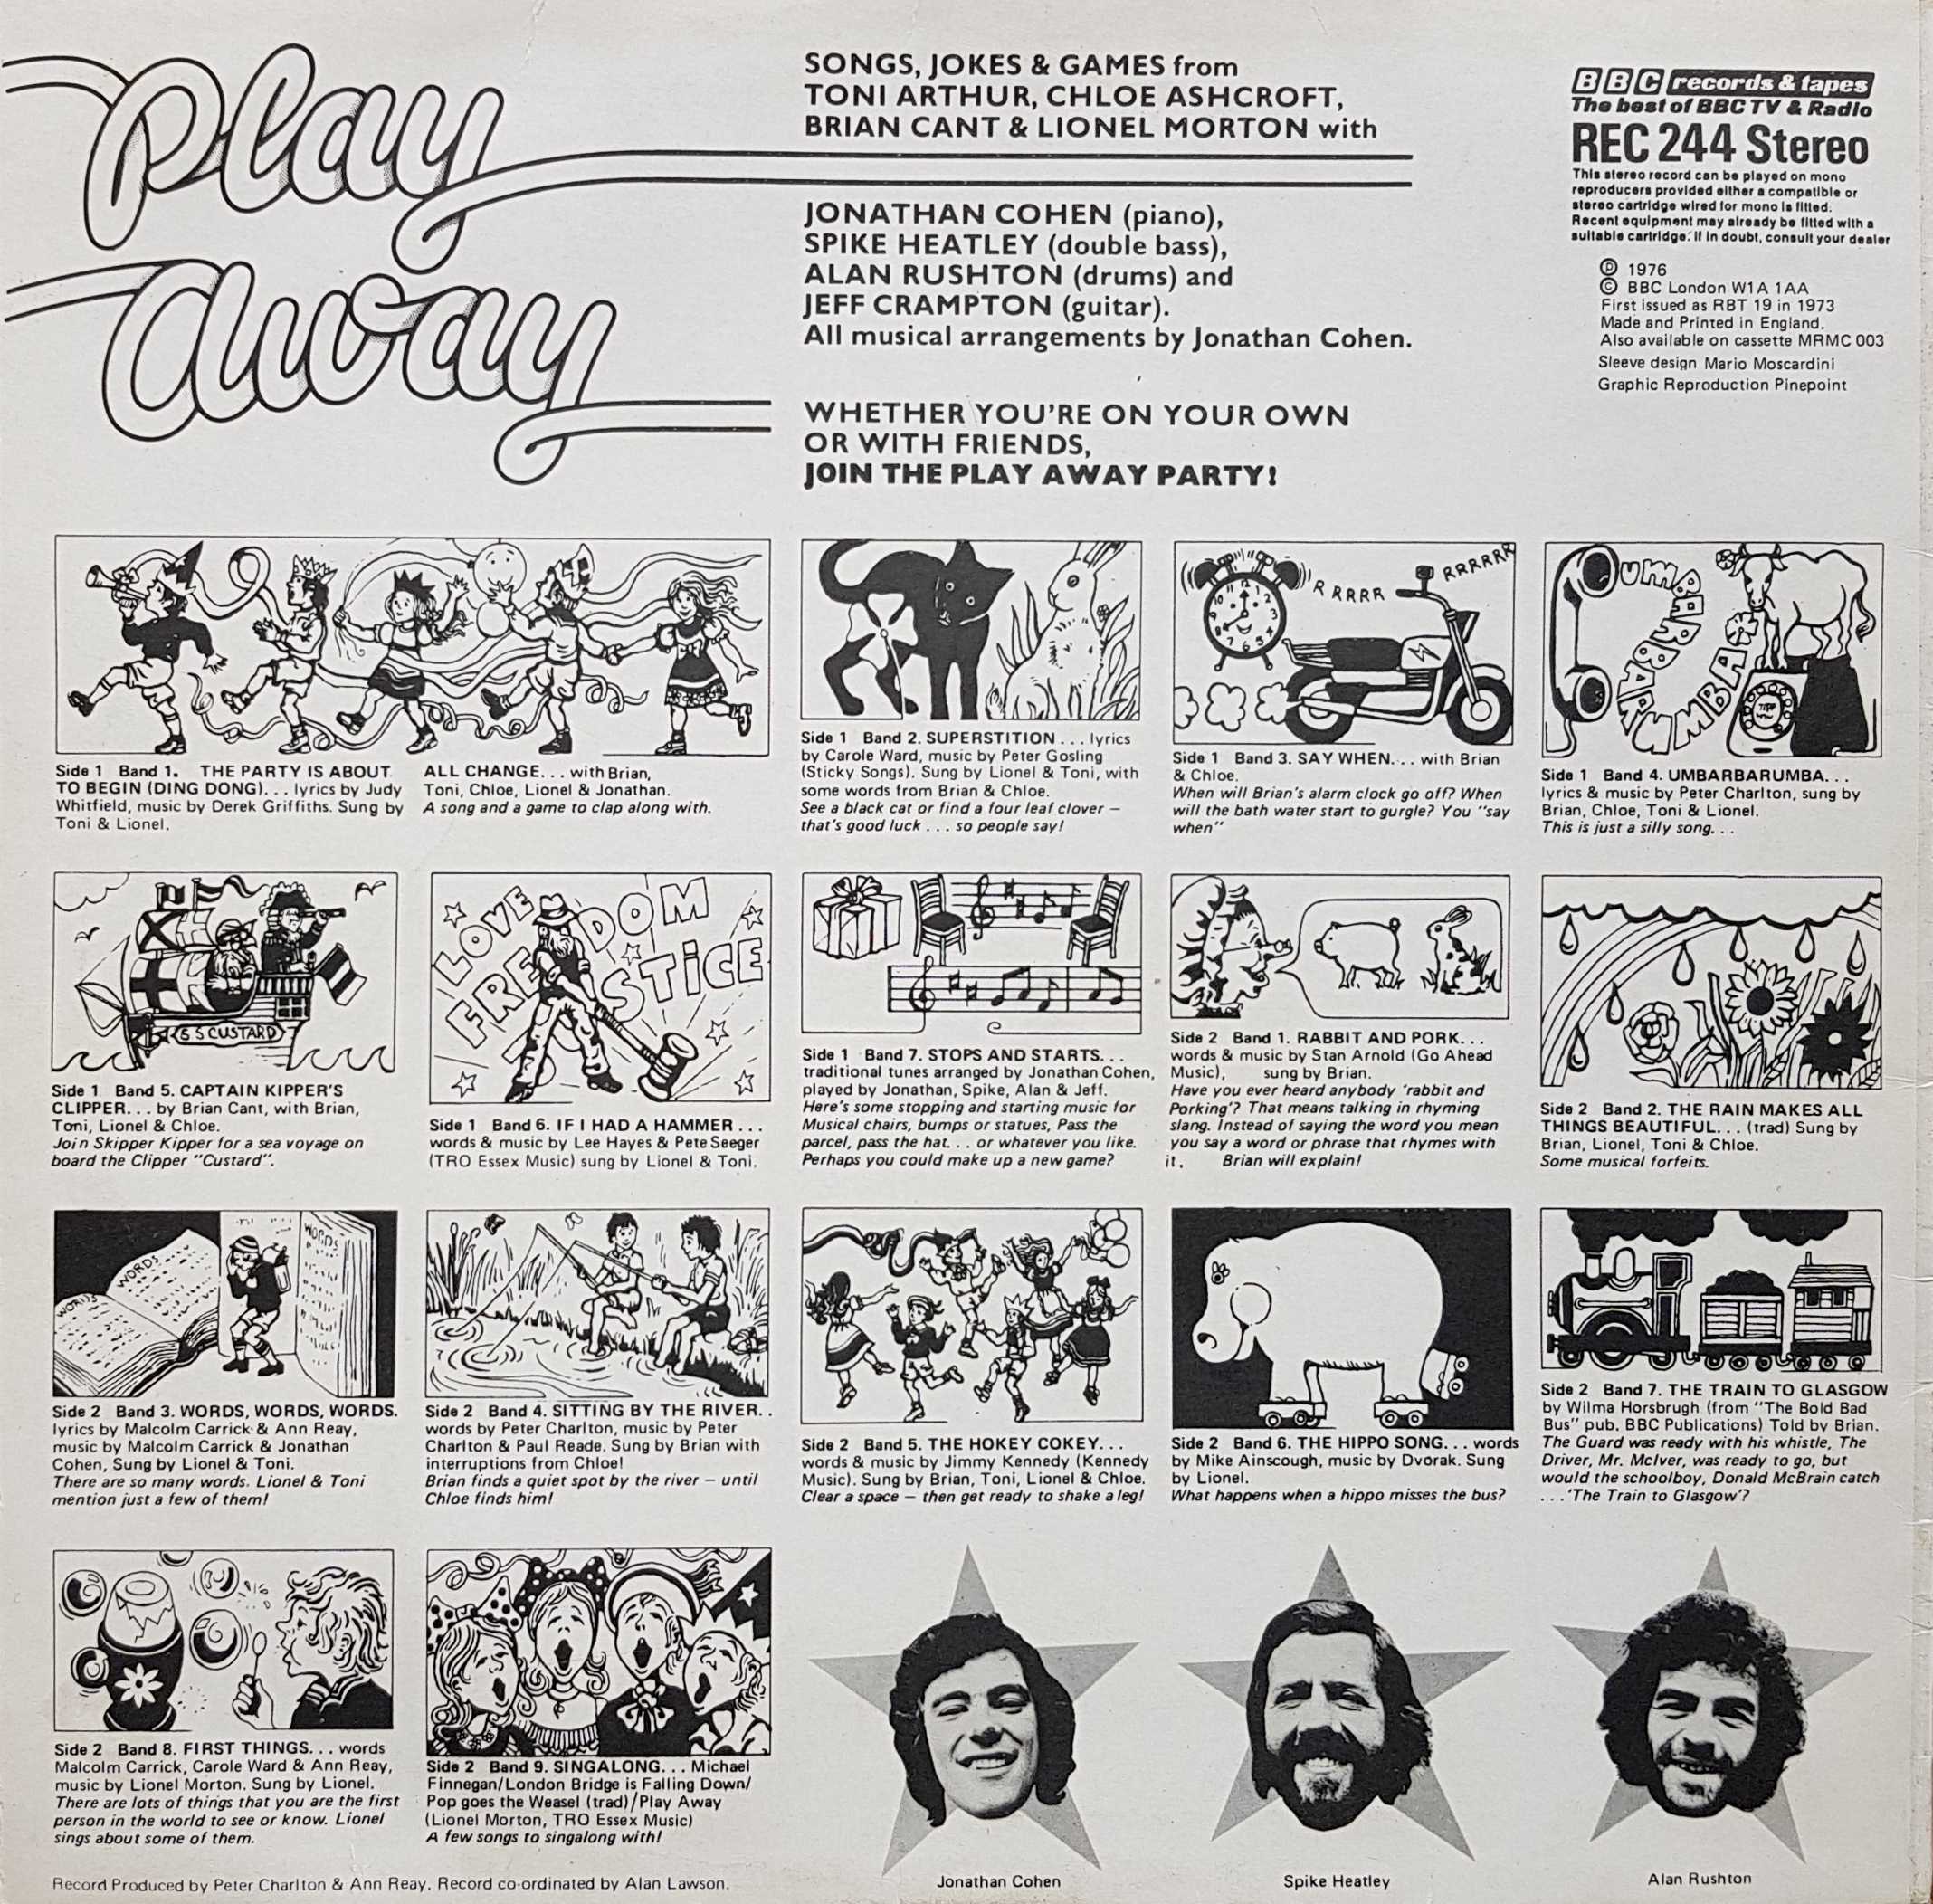 Picture of REC 244 Play away by artist Various from the BBC records and Tapes library